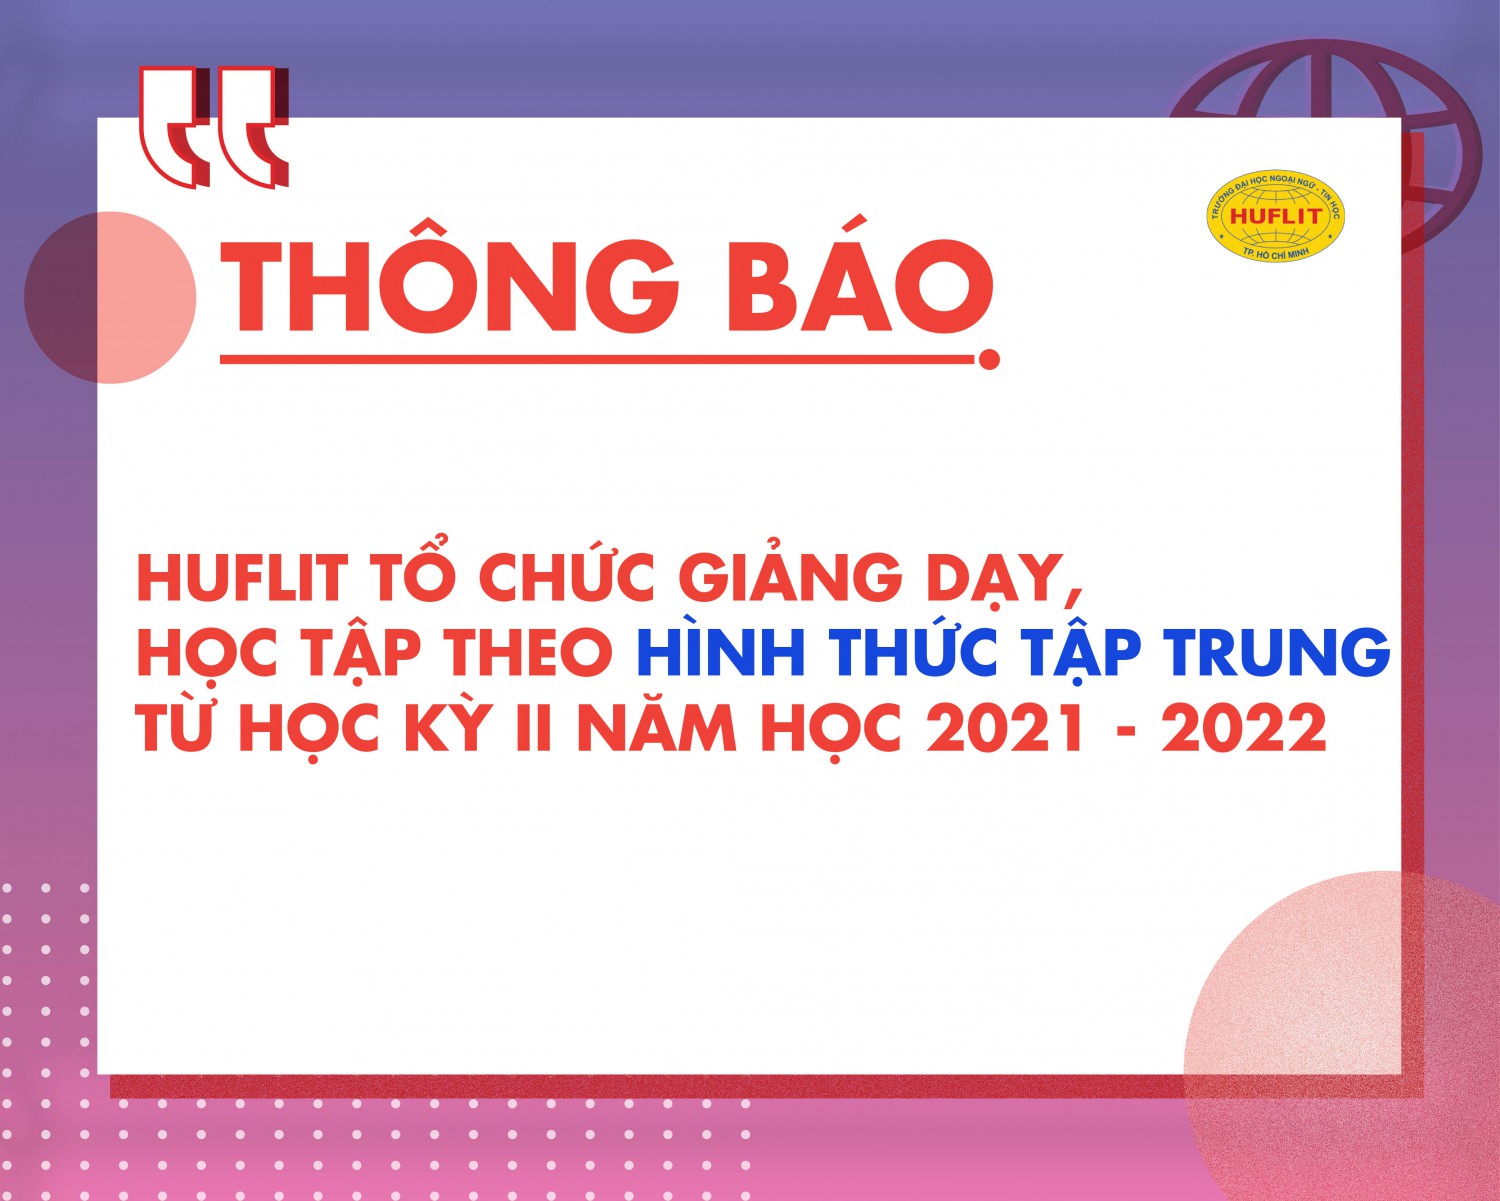 22.1.2022 HUFLIT to chuc giang day hoc tap theo hinh thuc tap trung